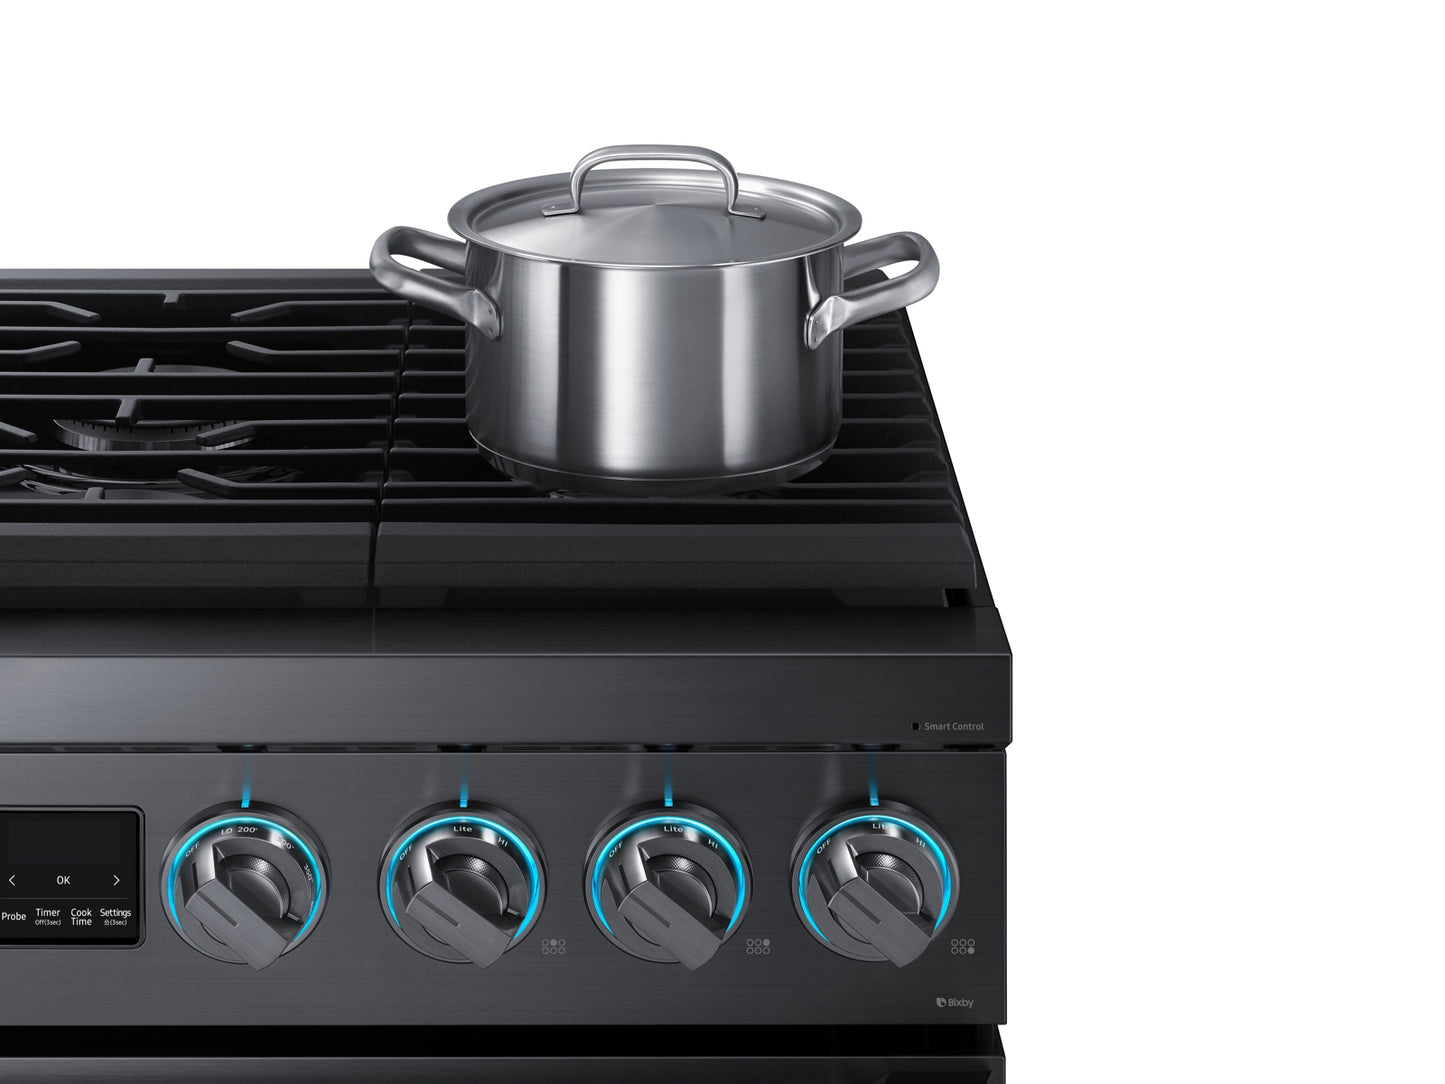 5.9 cu. ft. 36" Chef Collection Professional Gas Range in Black Stainless Steel - SAMSUNG - NX36R9966PM/AA